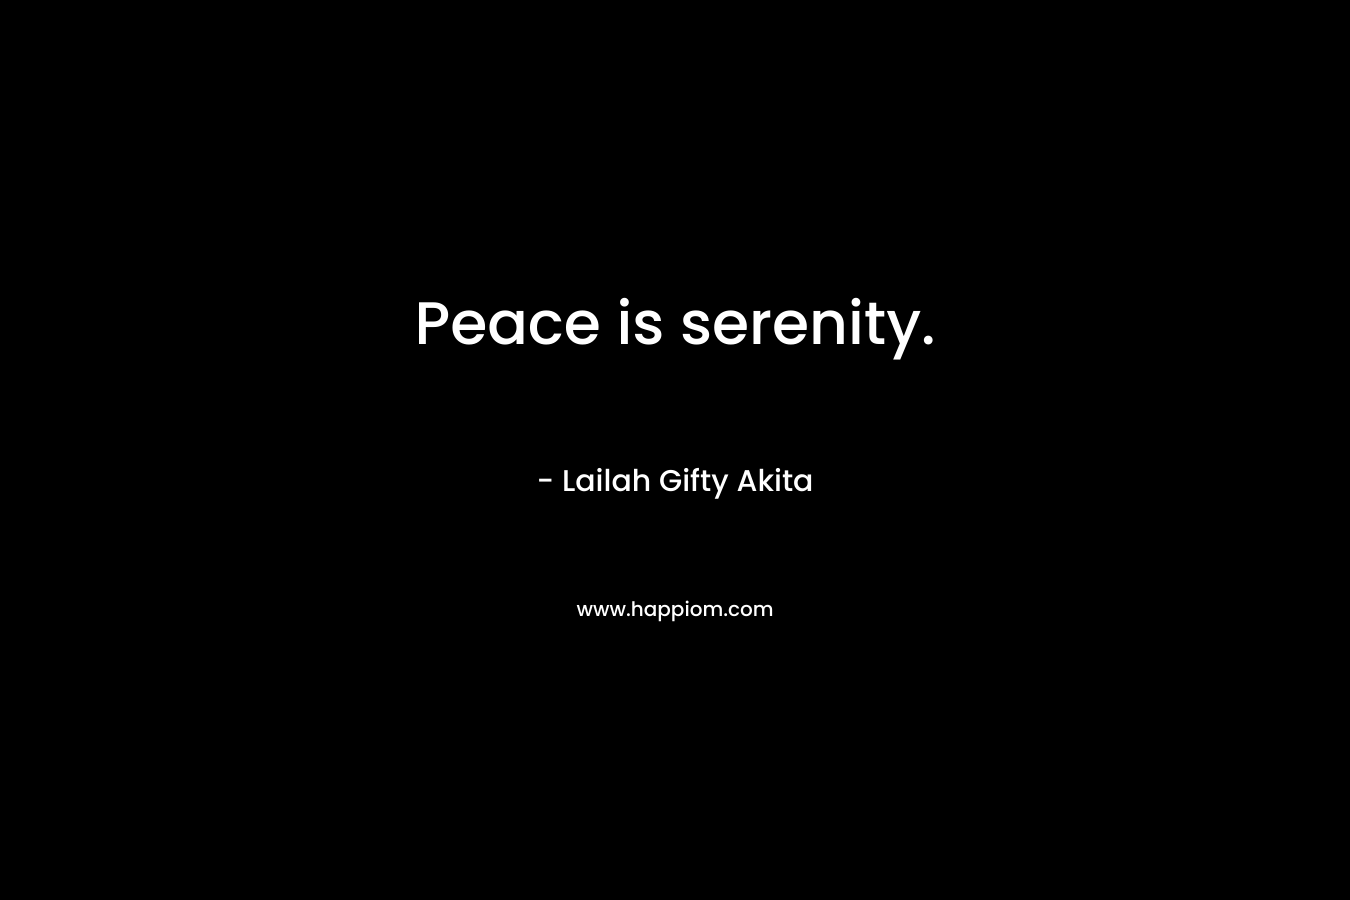 Peace is serenity.